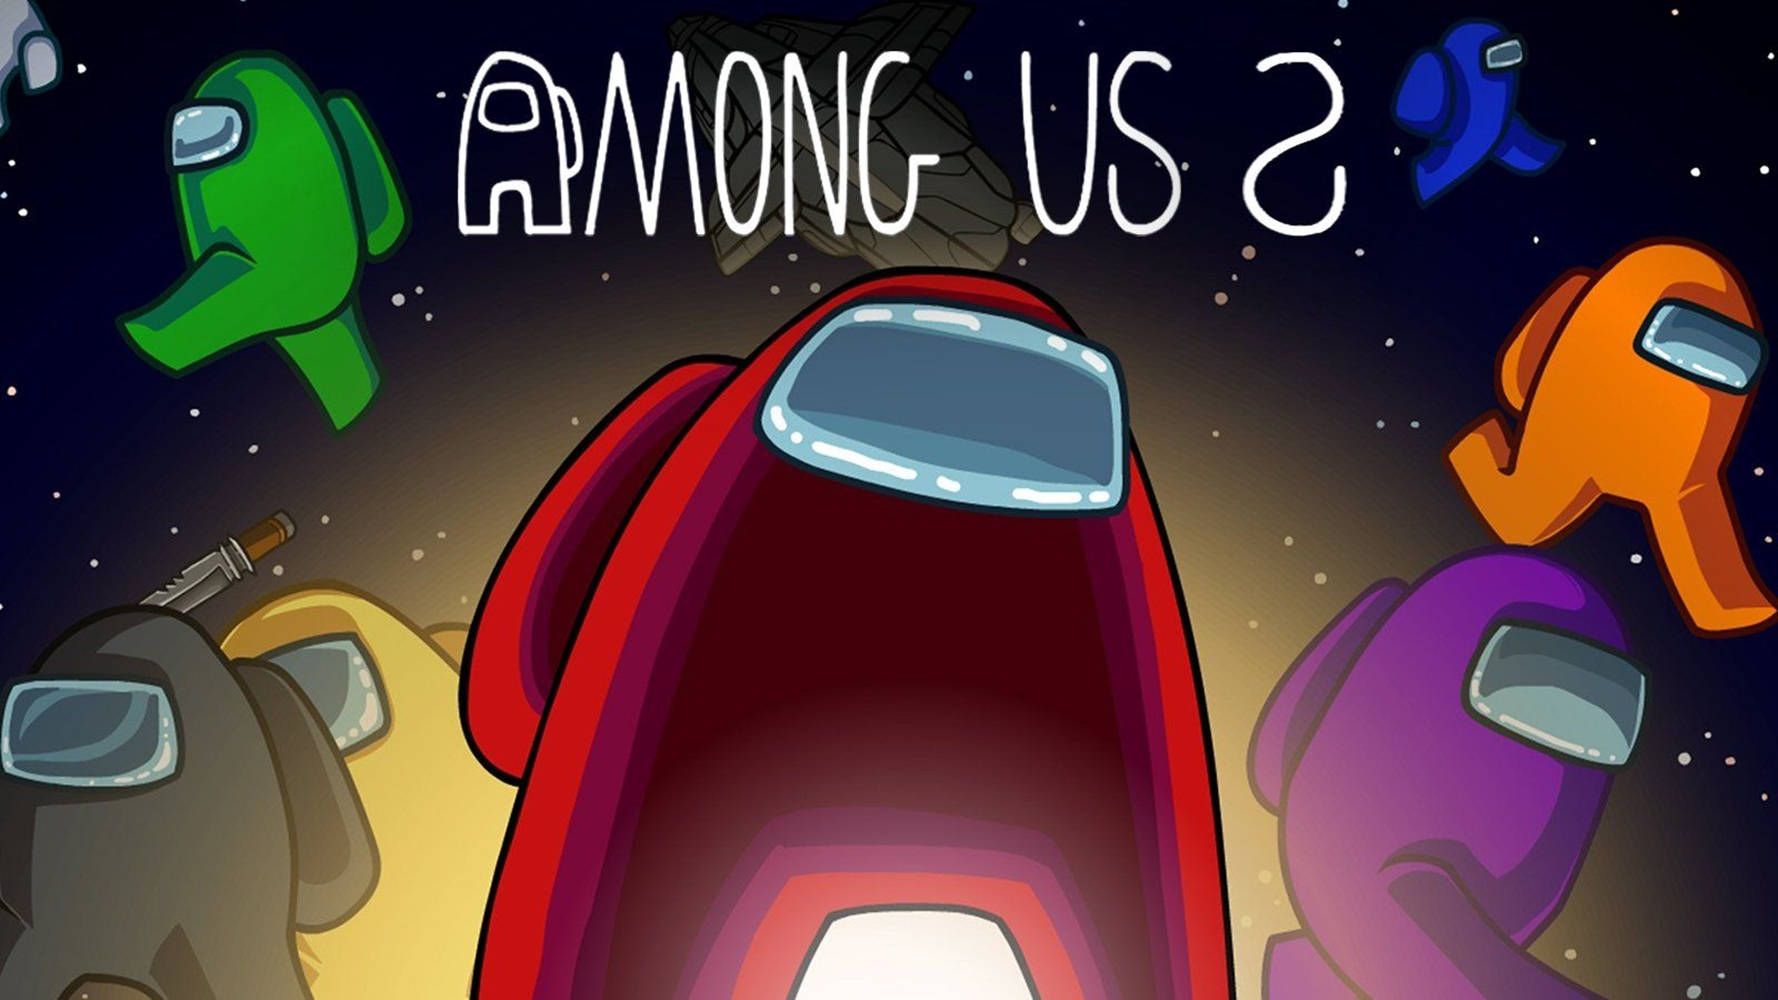 Among Us 2, a new game in the popular multiplayer game among us - Among Us